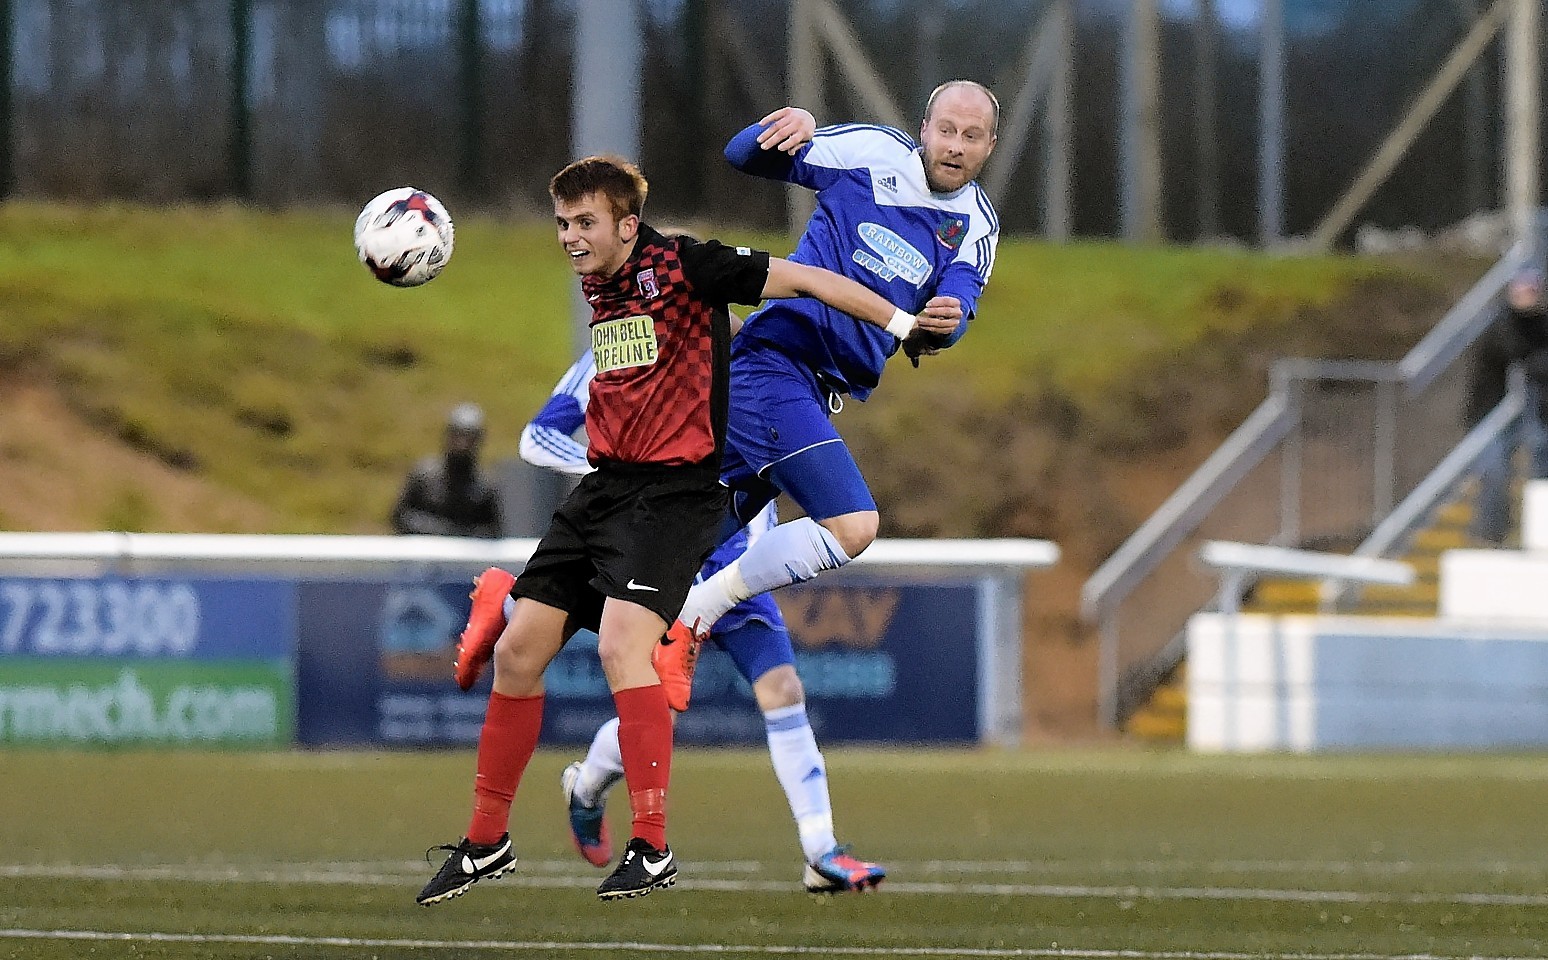 Stuart Duff playing for Cove Rangers against Inverurie Locos.